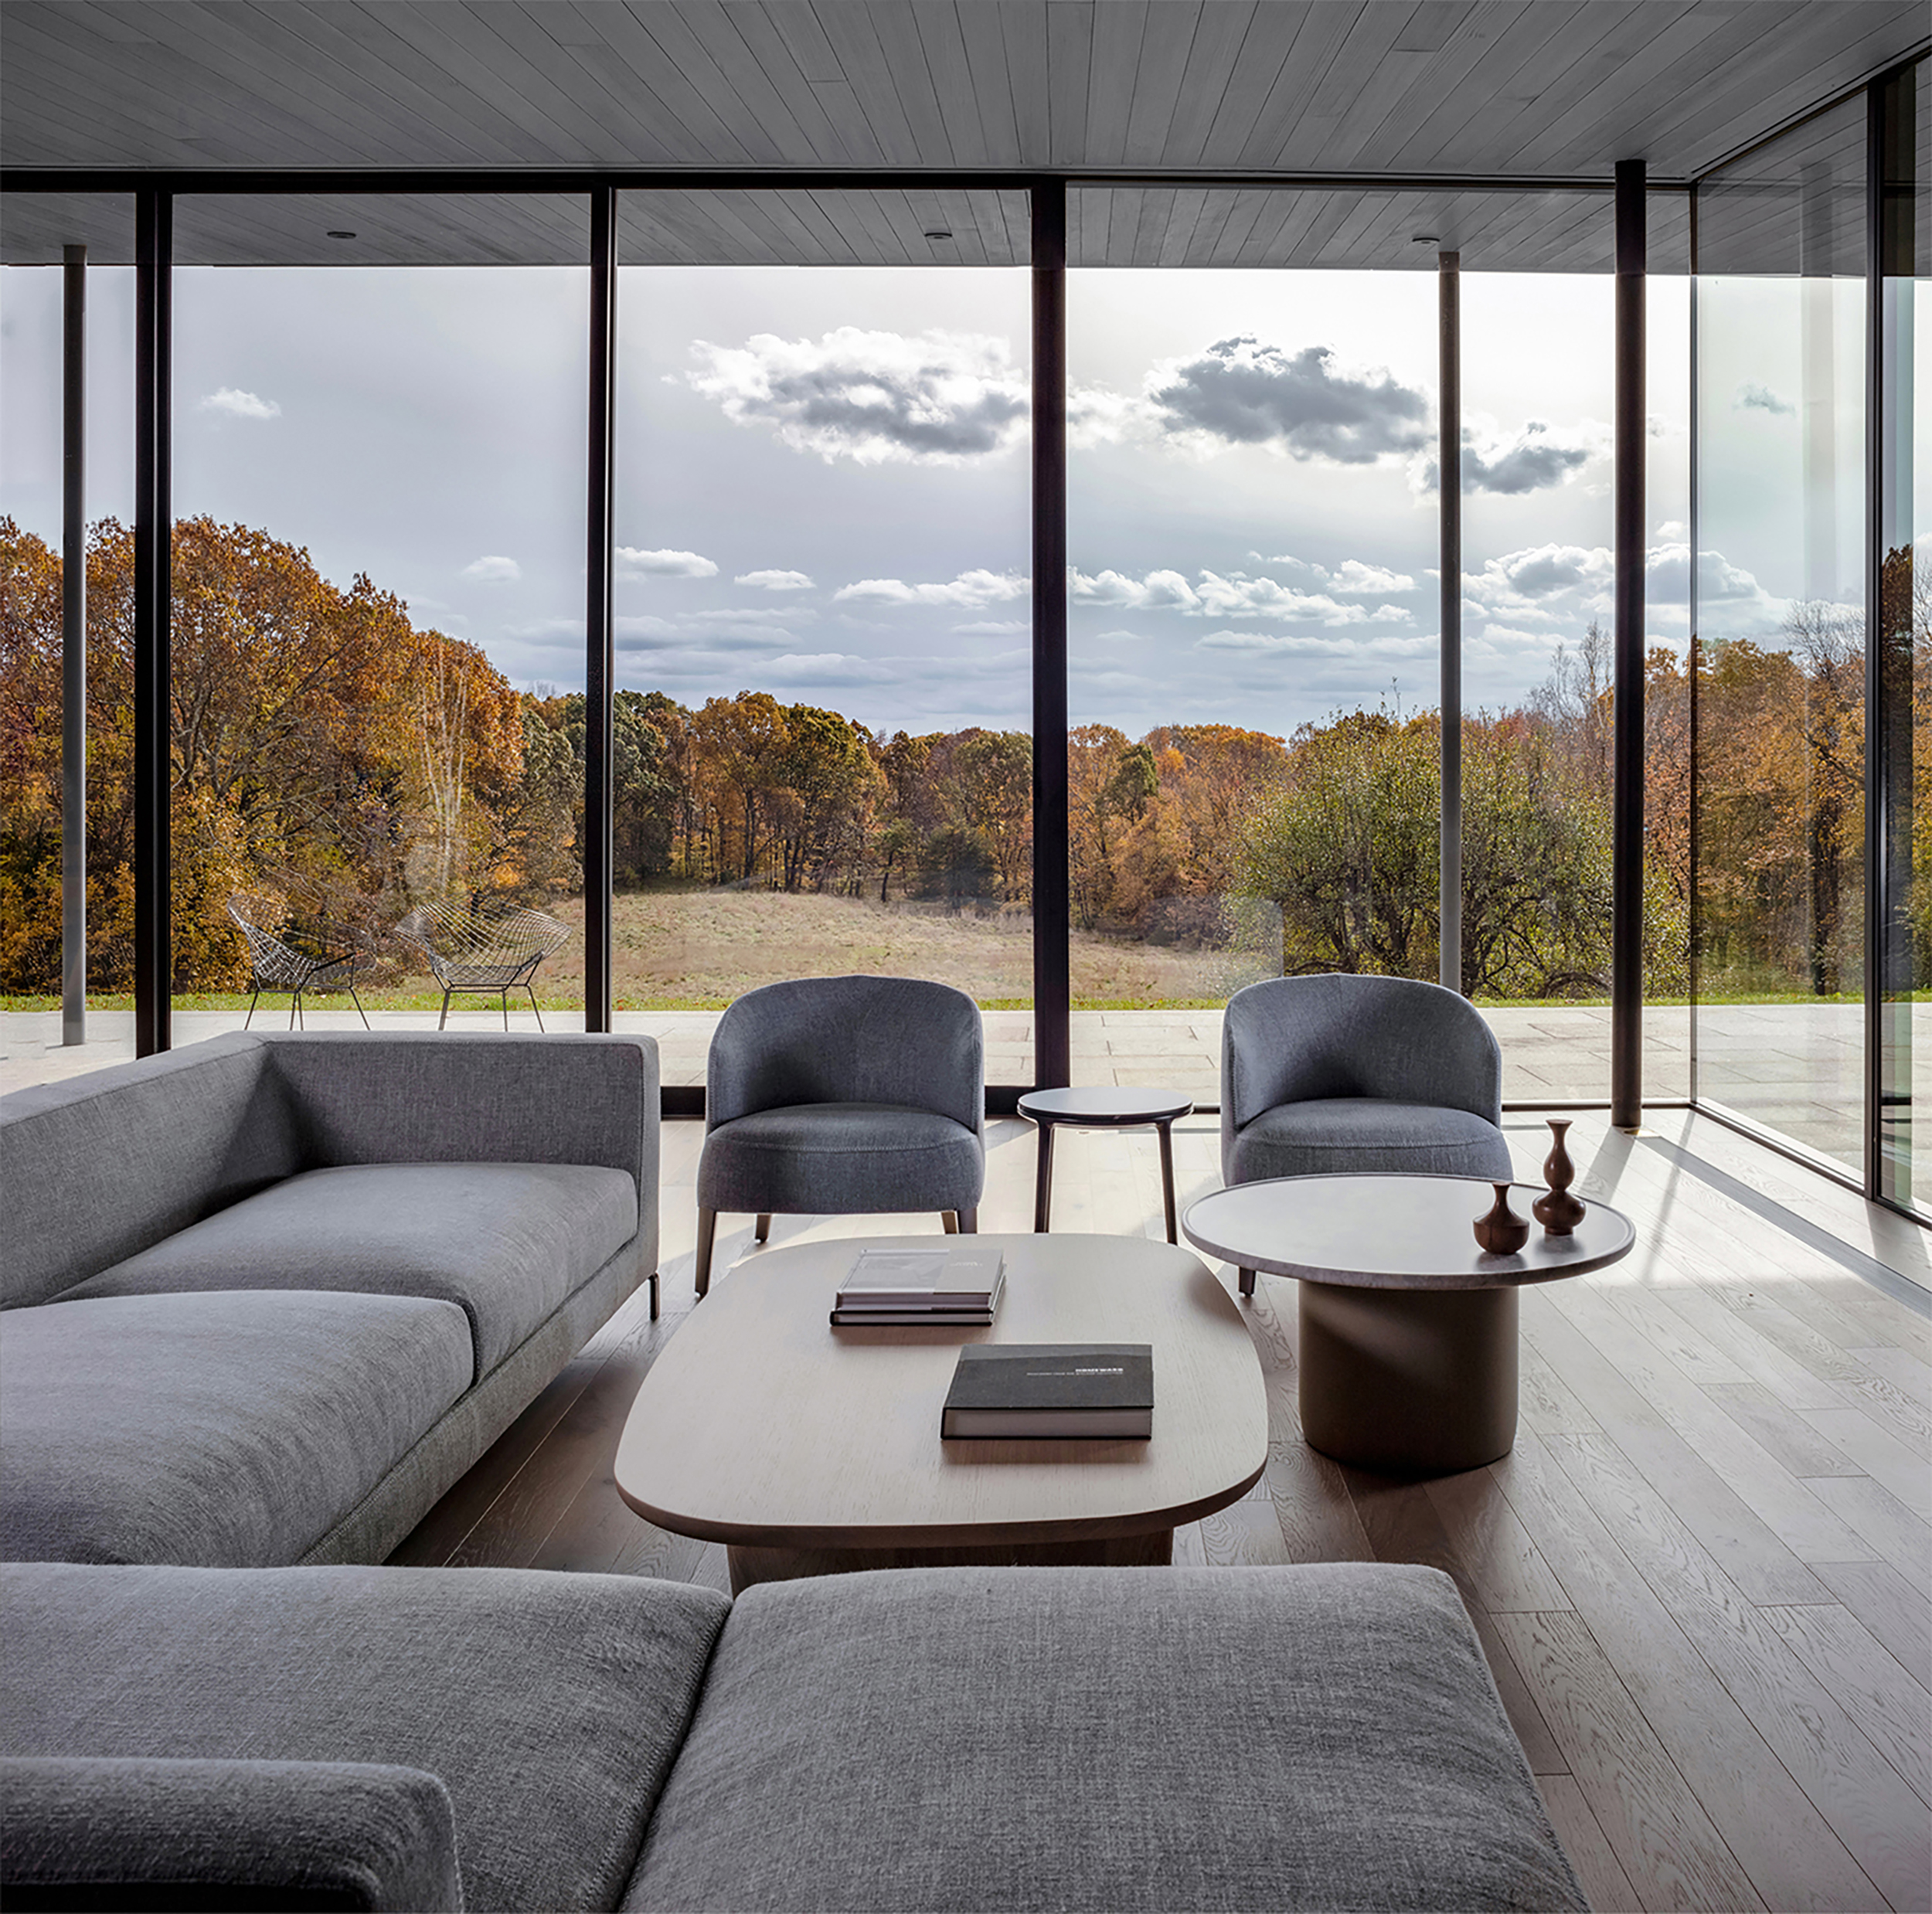 A modern living room with glass walls looking out on a fall country landscape with changing leaves